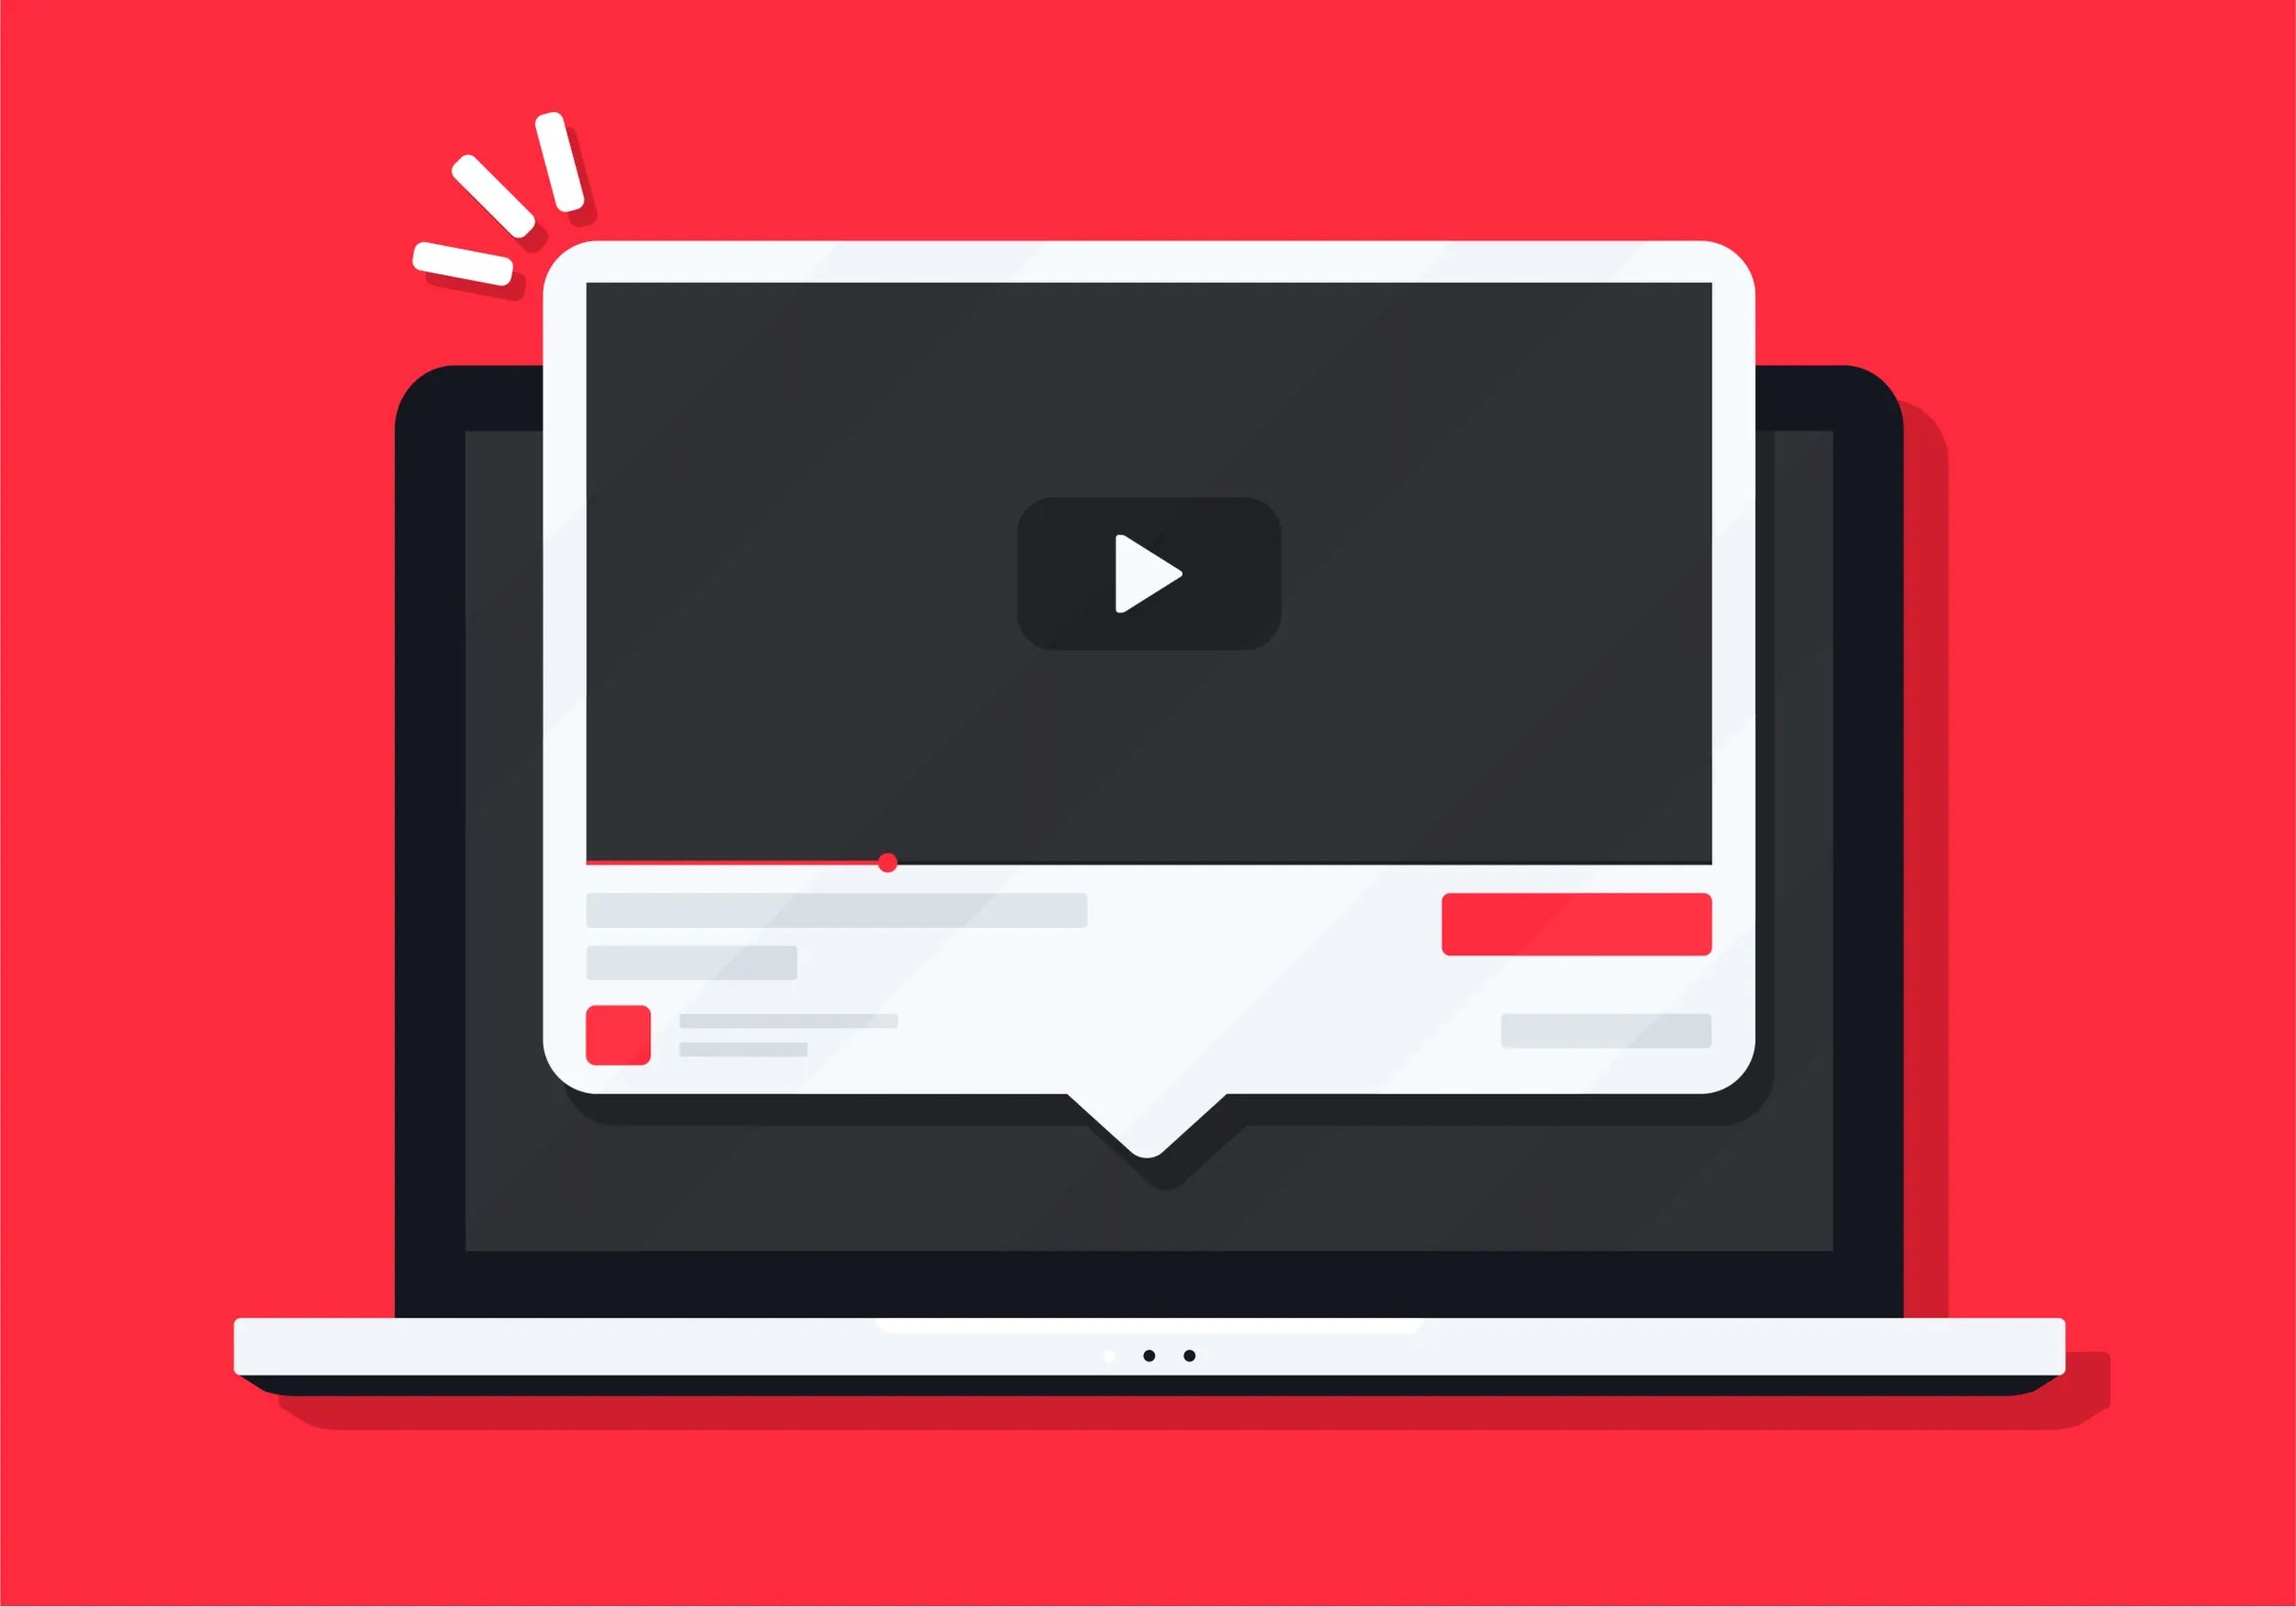 YouTube is using pop-up ads to tell users to stop using ad-blockers while watching videos.